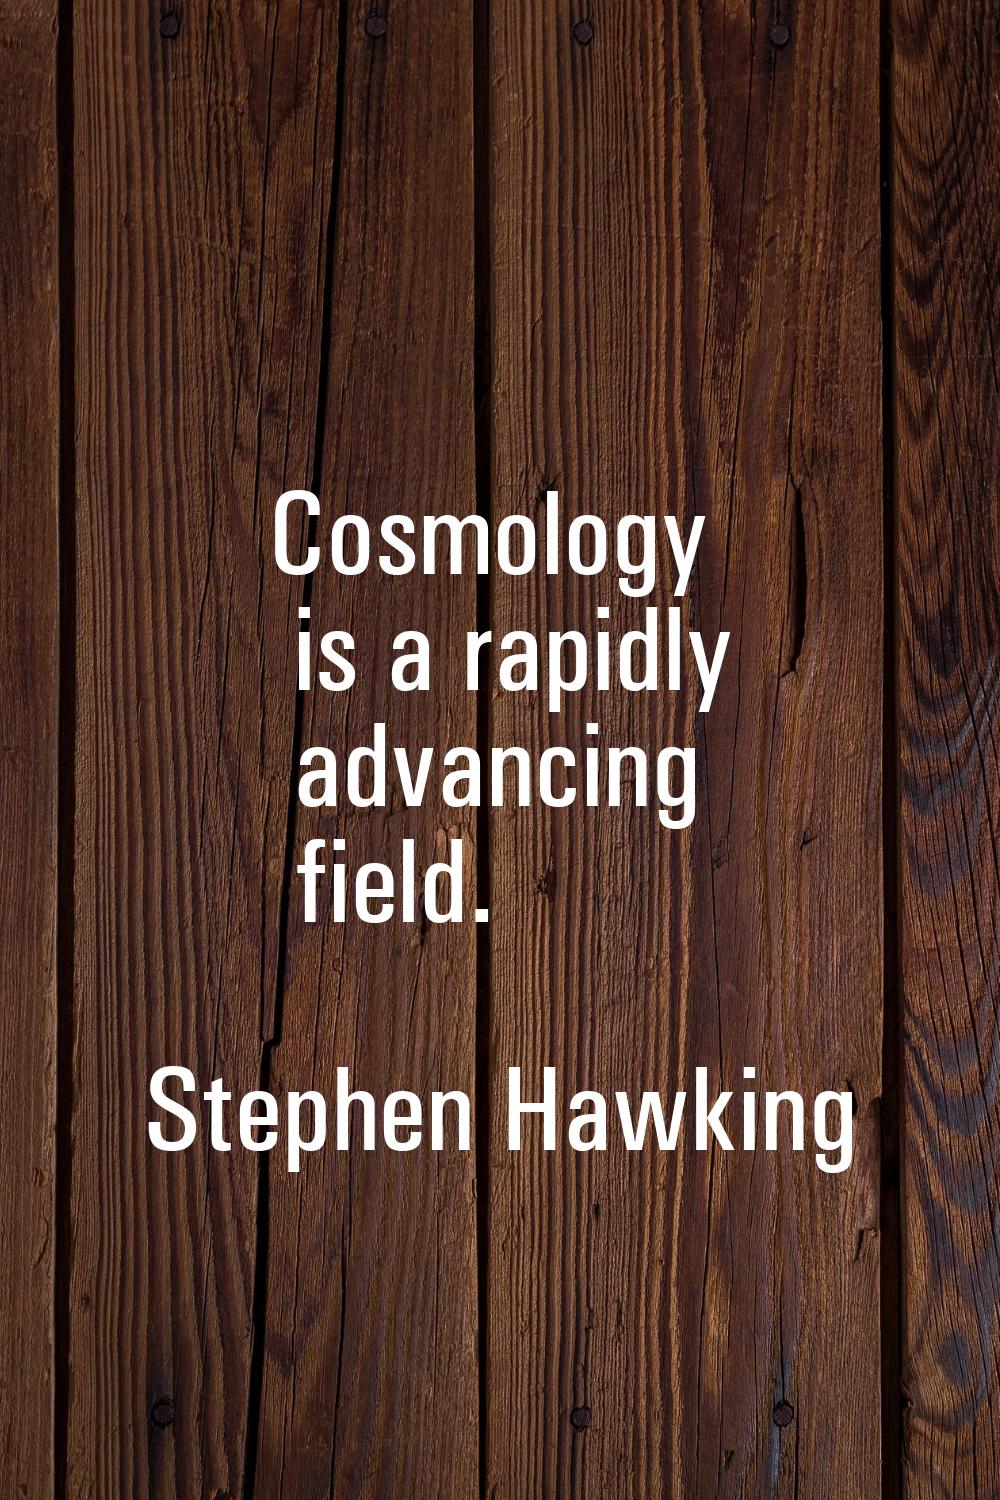 Cosmology is a rapidly advancing field.